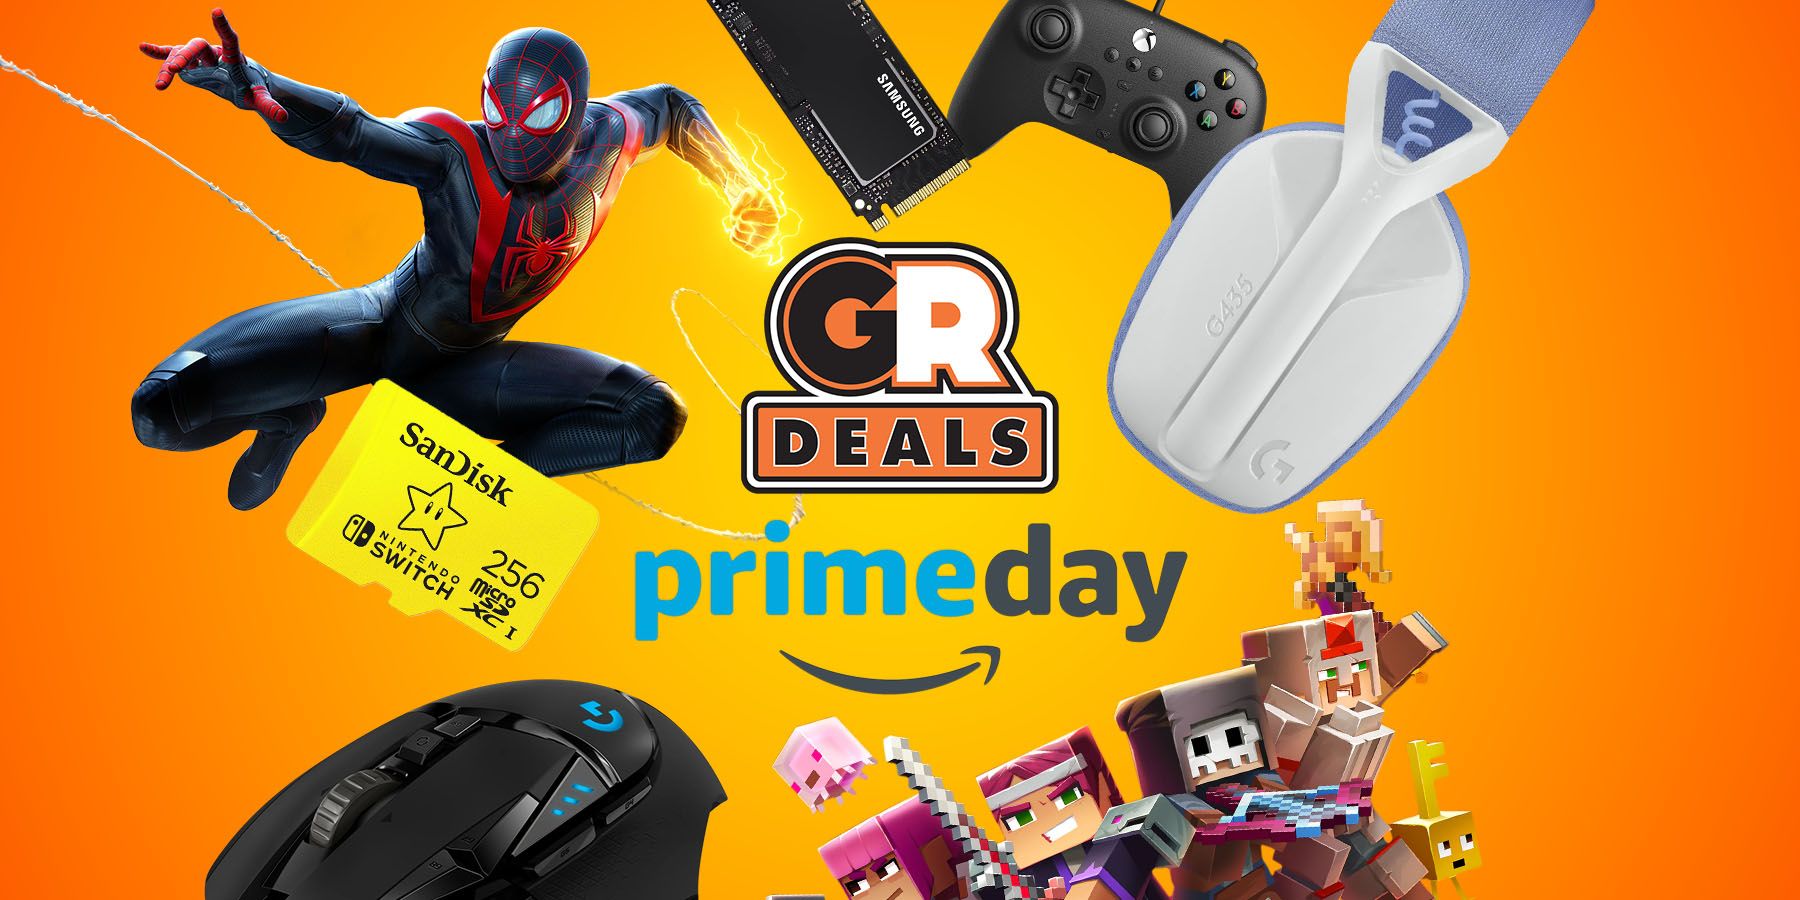 Best Prime Day gaming deals: Controllers, keyboards, SSD, and more